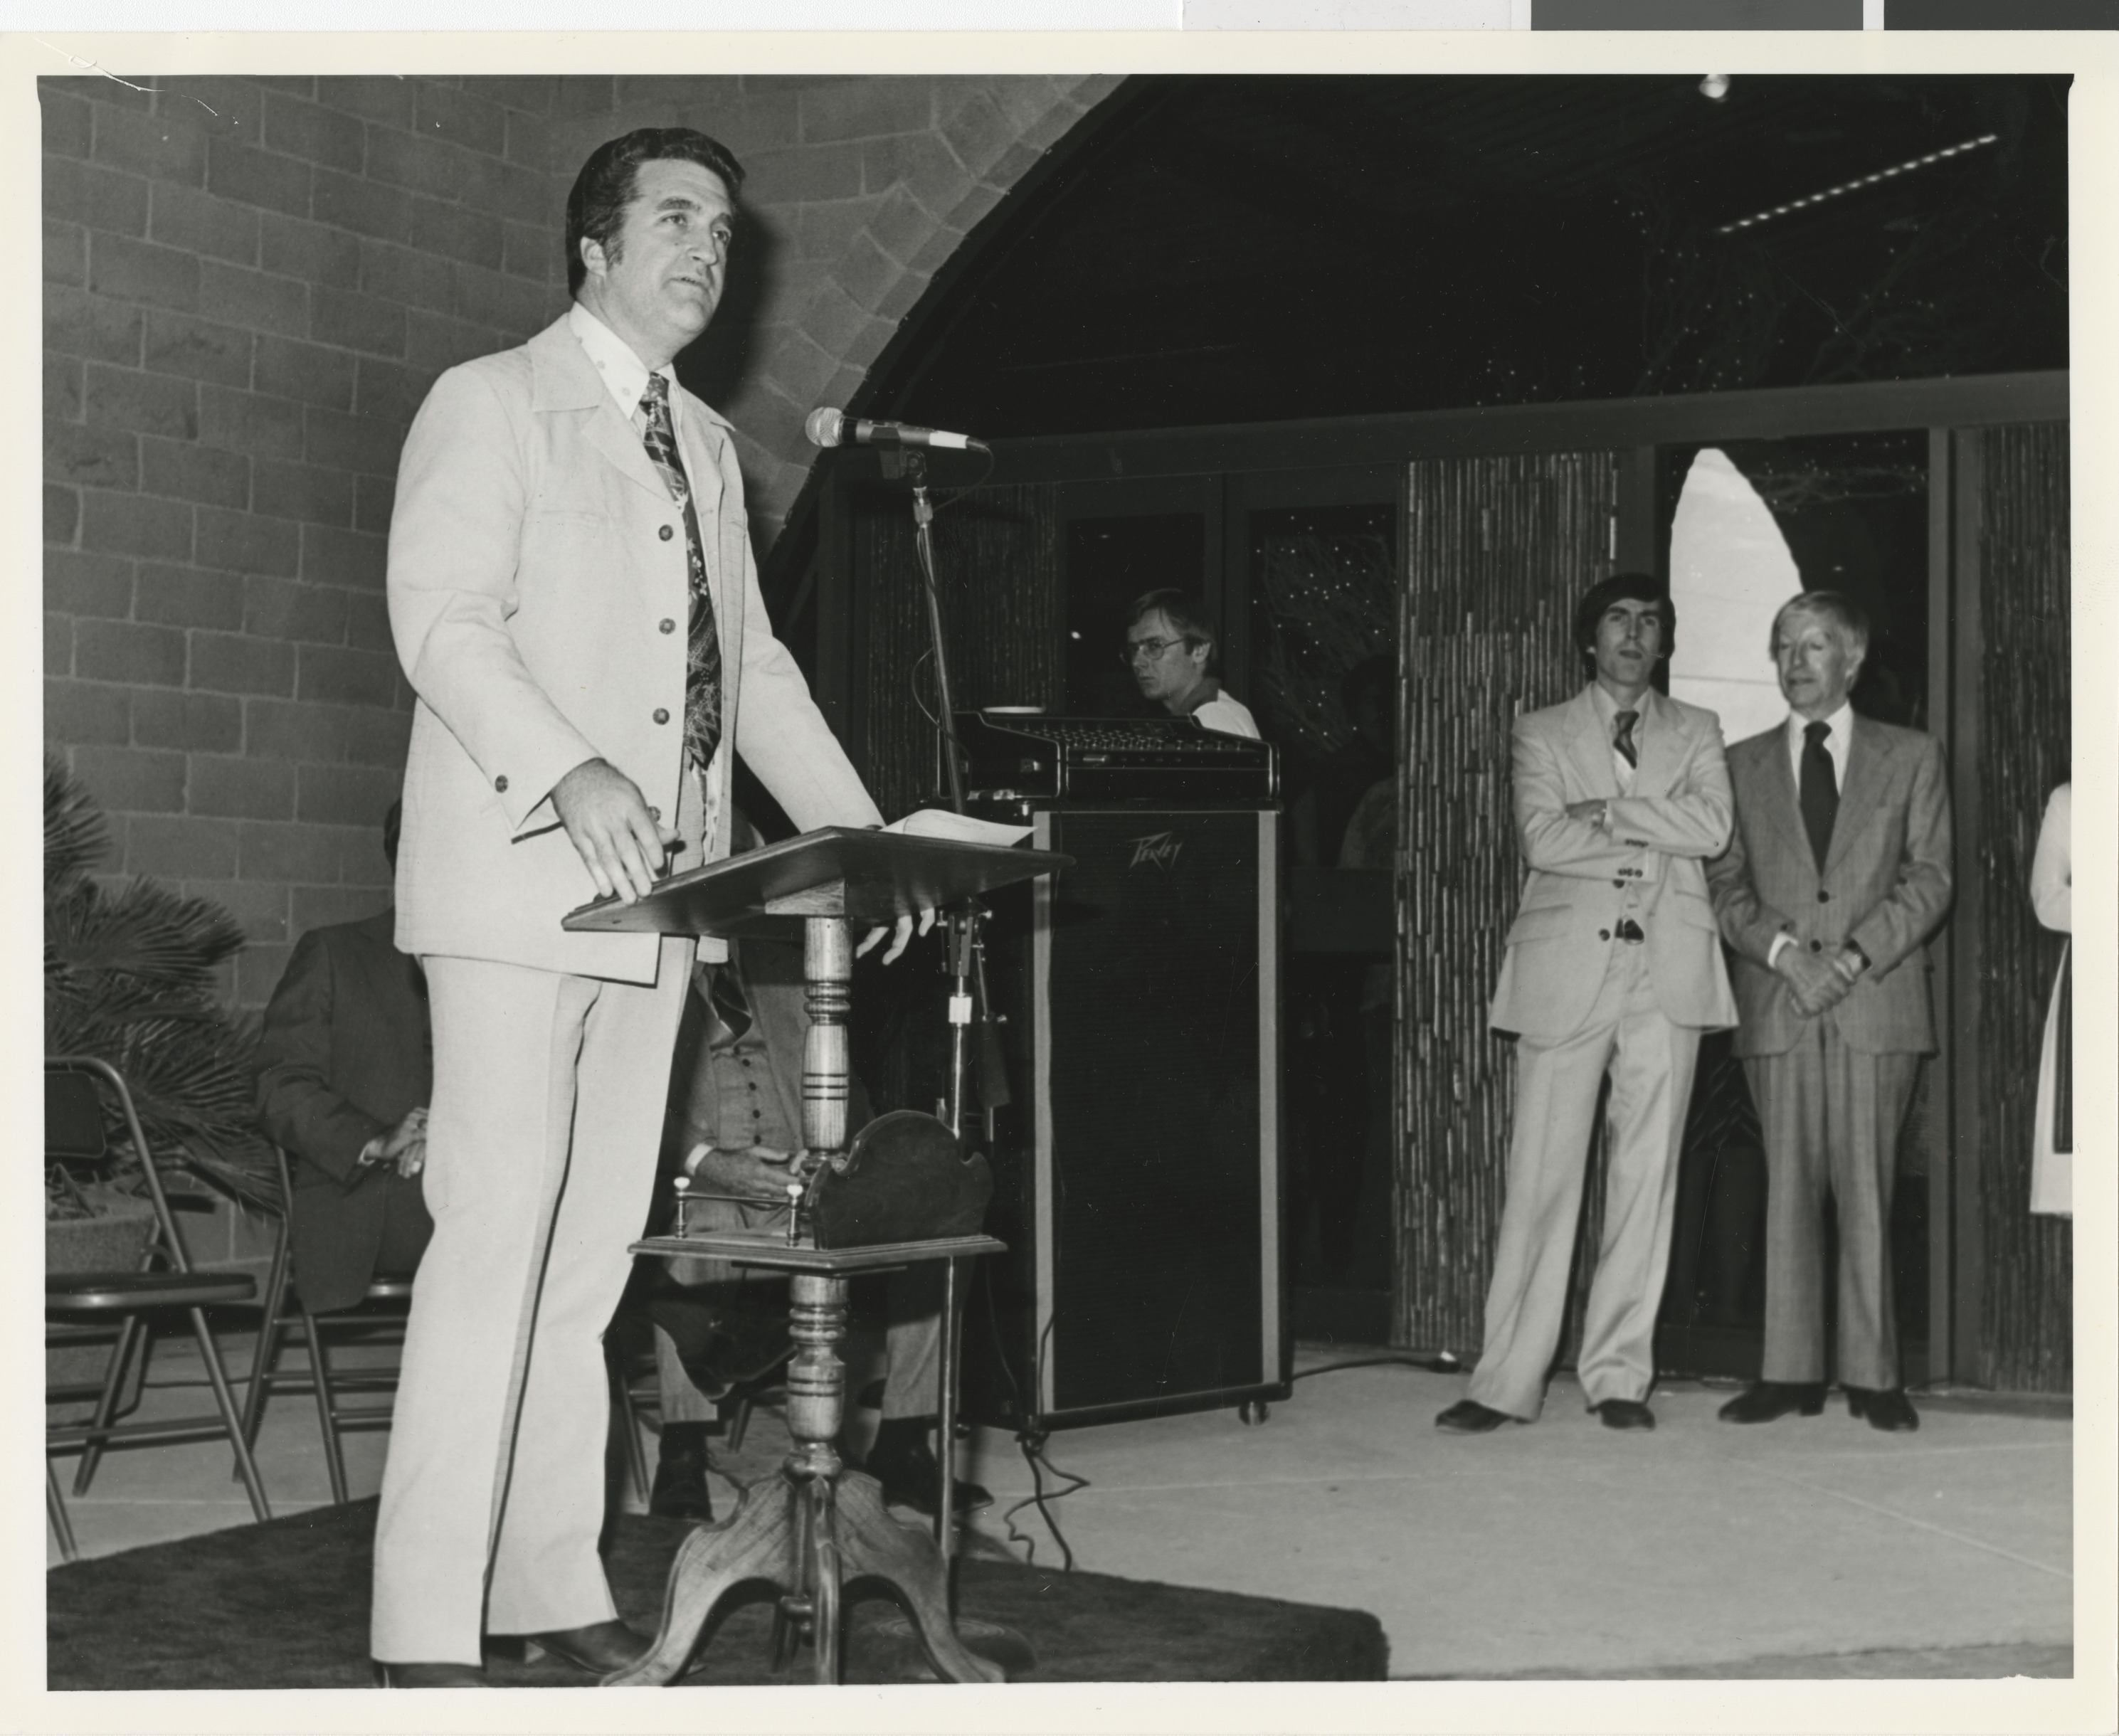 Photograph of Ron Lurie speaking at an event